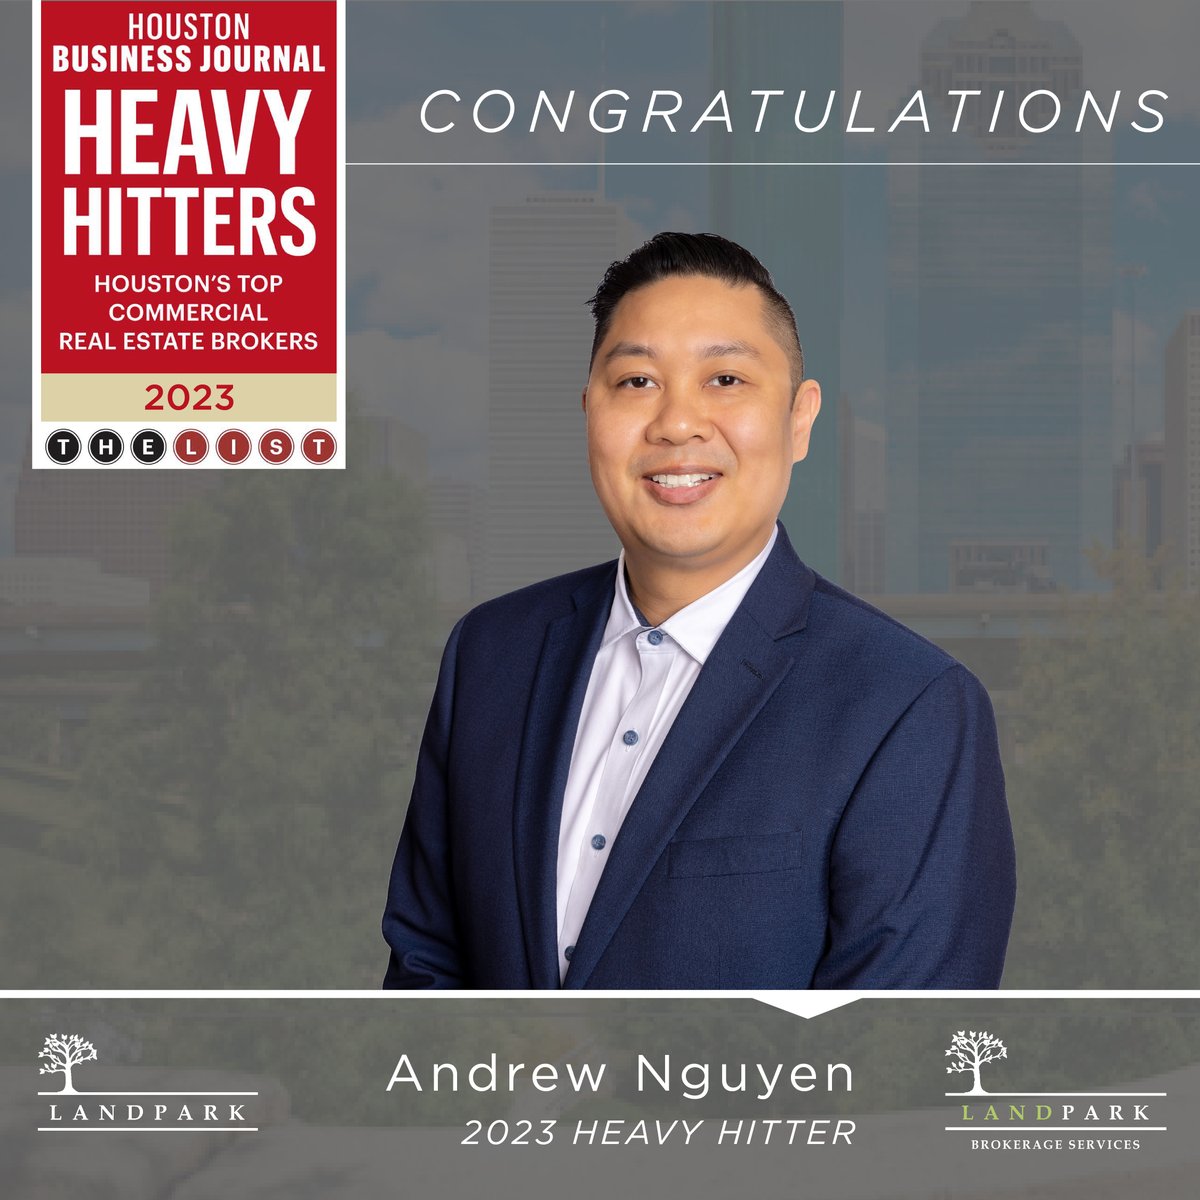 Congratulation to our 2023 @HOUBizJournal  Heavy Hitter, Andrew Nguyen! We're honored for Andrew's tremendous accomplishments in carrying on the tradition of our Heavy Hitters, Tim Thomas (2022) and Will McGrath (2017, 2018).

#LandParkLife #HoustonCRE #HeavyHitters #HBJ